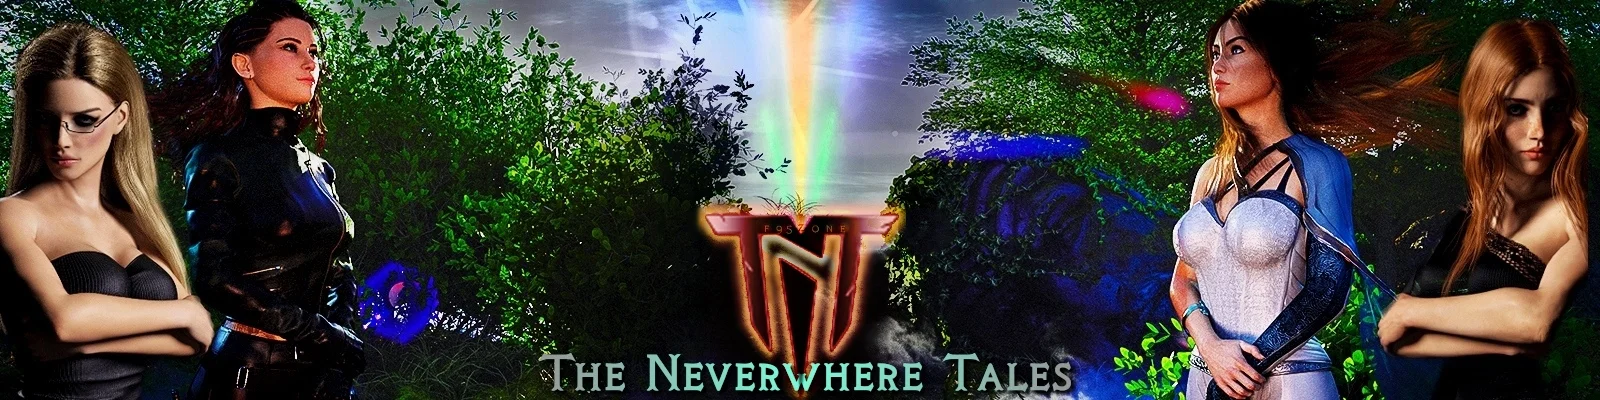 The Neverwhere Tales v.0.4.0